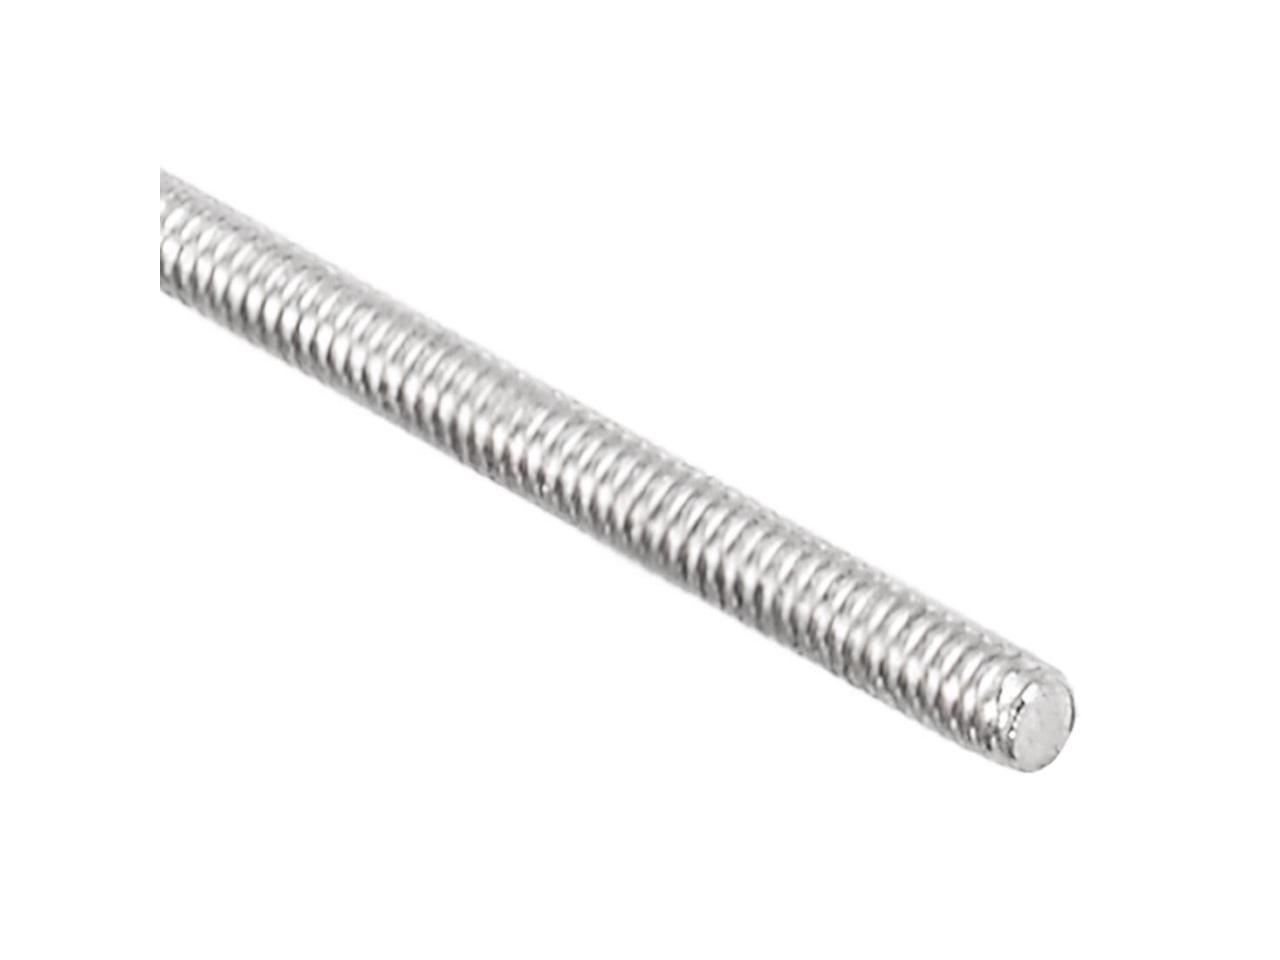 M12x1.25mmx250mm Fully Threaded Rod 304 Stainless Steel Right Hand Threads 